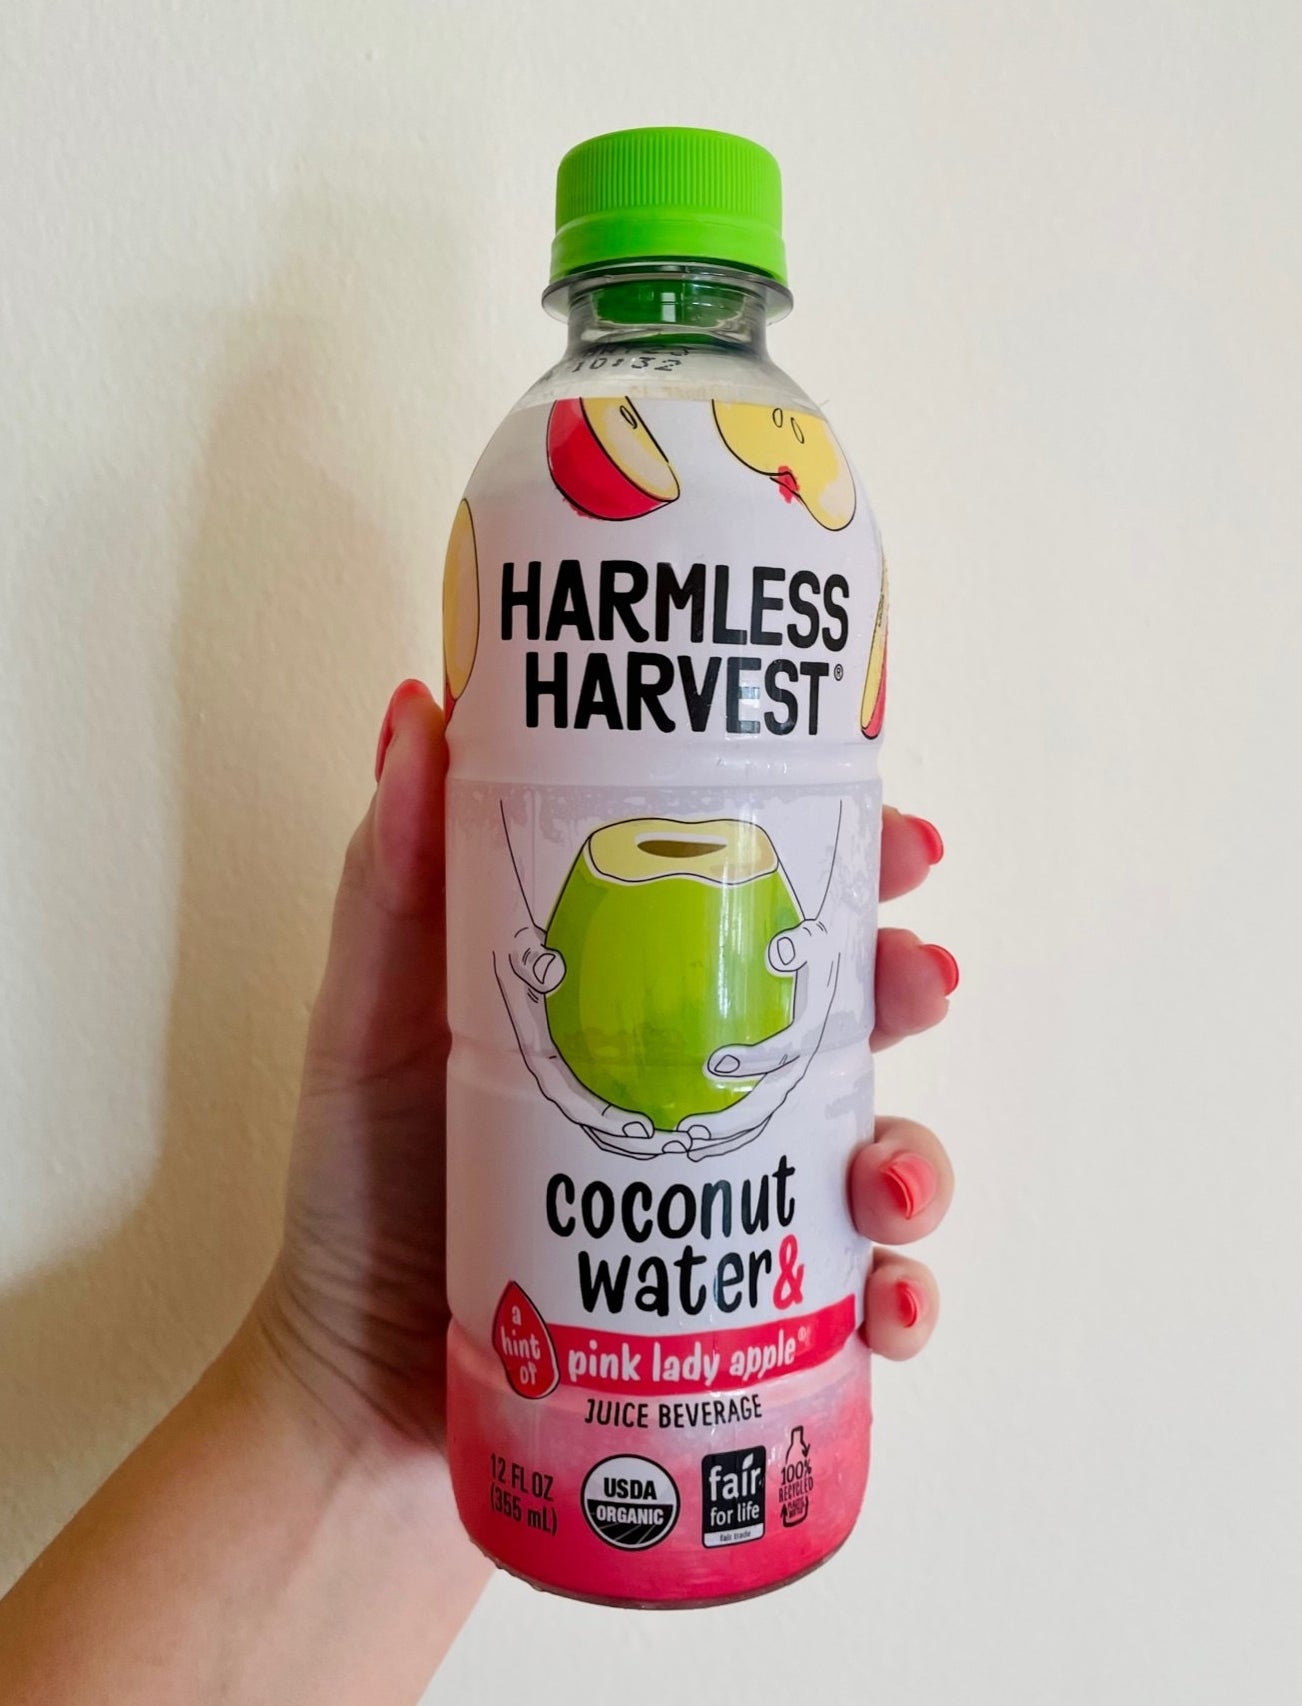 A bottle of the coconut water and apple juice beverage